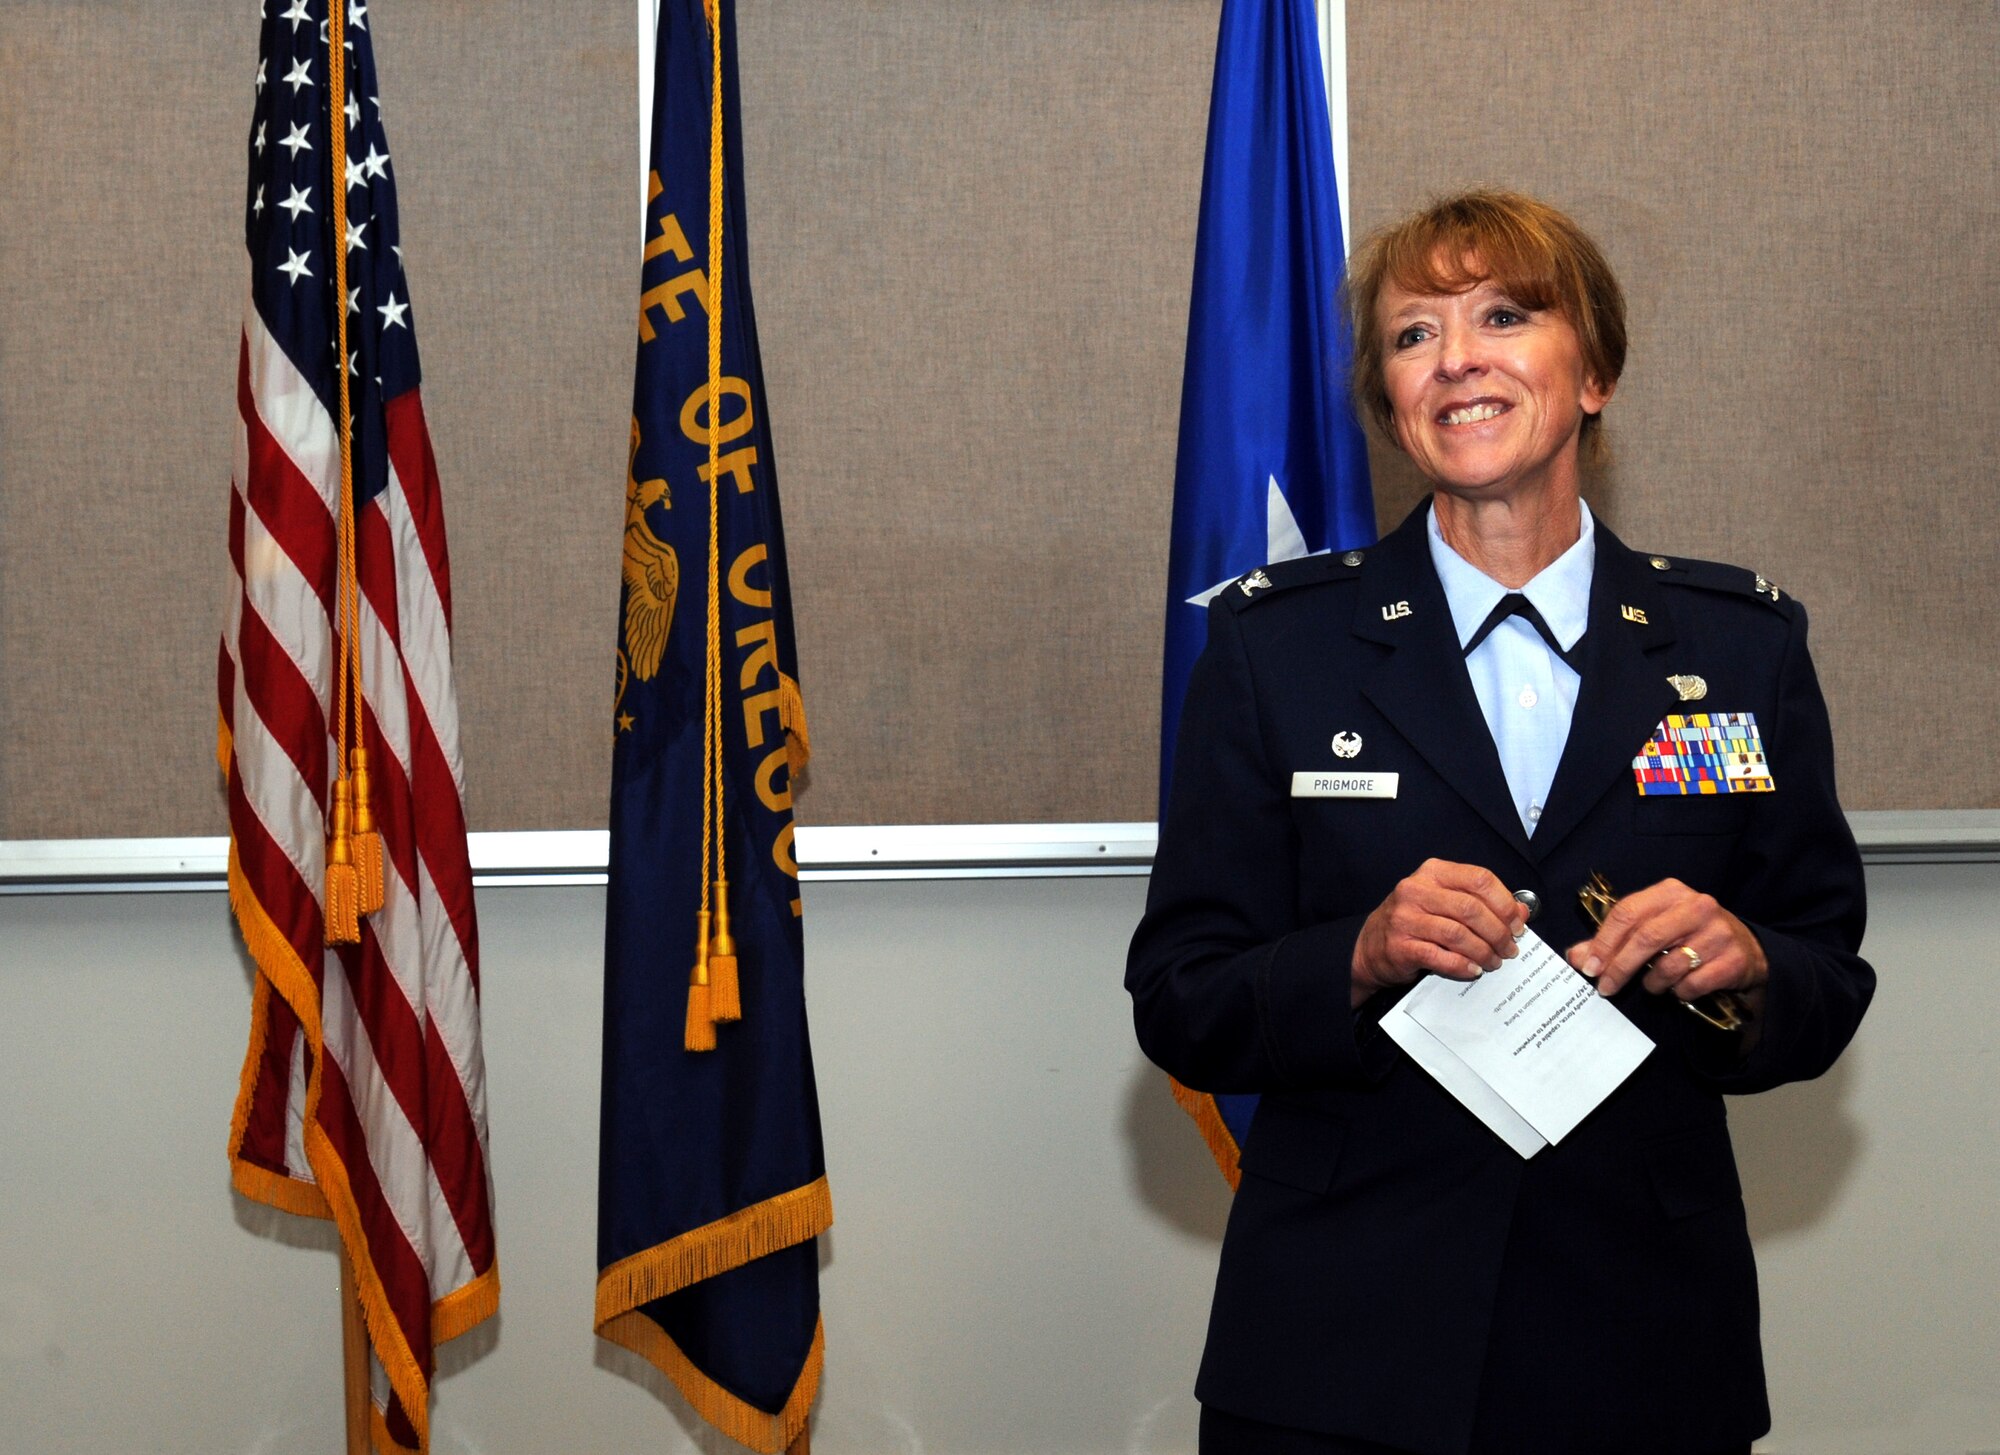 Newly promoted Col. Donna Prigmore addresses the Airmen and others in attendance for the 142nd Mission Support Group Change of Command ceremony, Portland Air National Guard Base, Ore., Aug. 3, 2014. (U.S. Air National Guard photo by Tech. Sgt. John Hughel, 142nd Fighter Wing Public Affairs/Released)